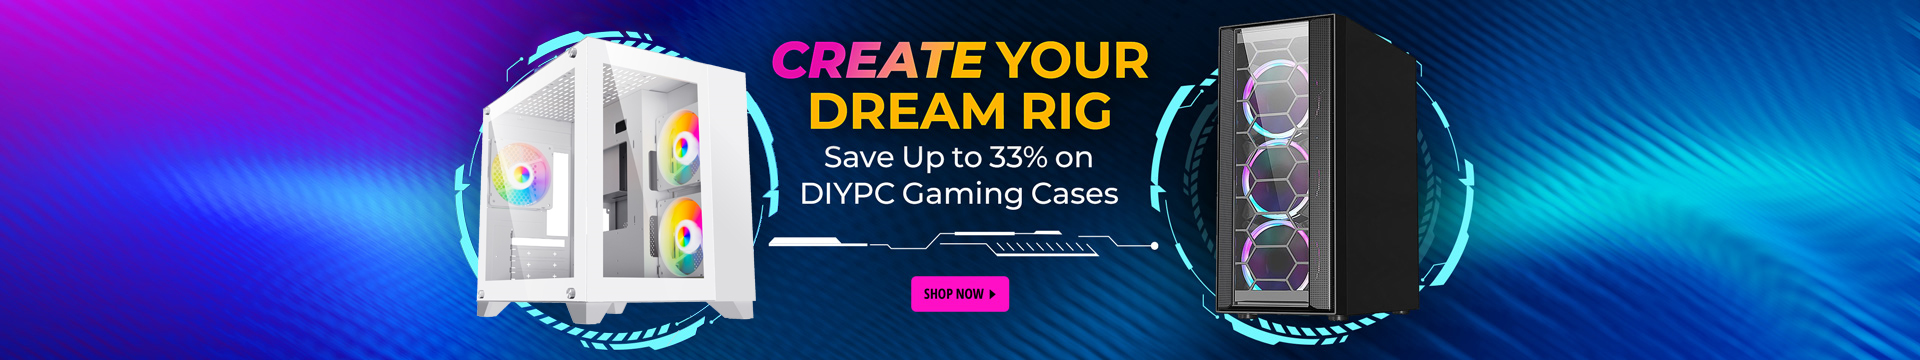 Create Your Dream RIG